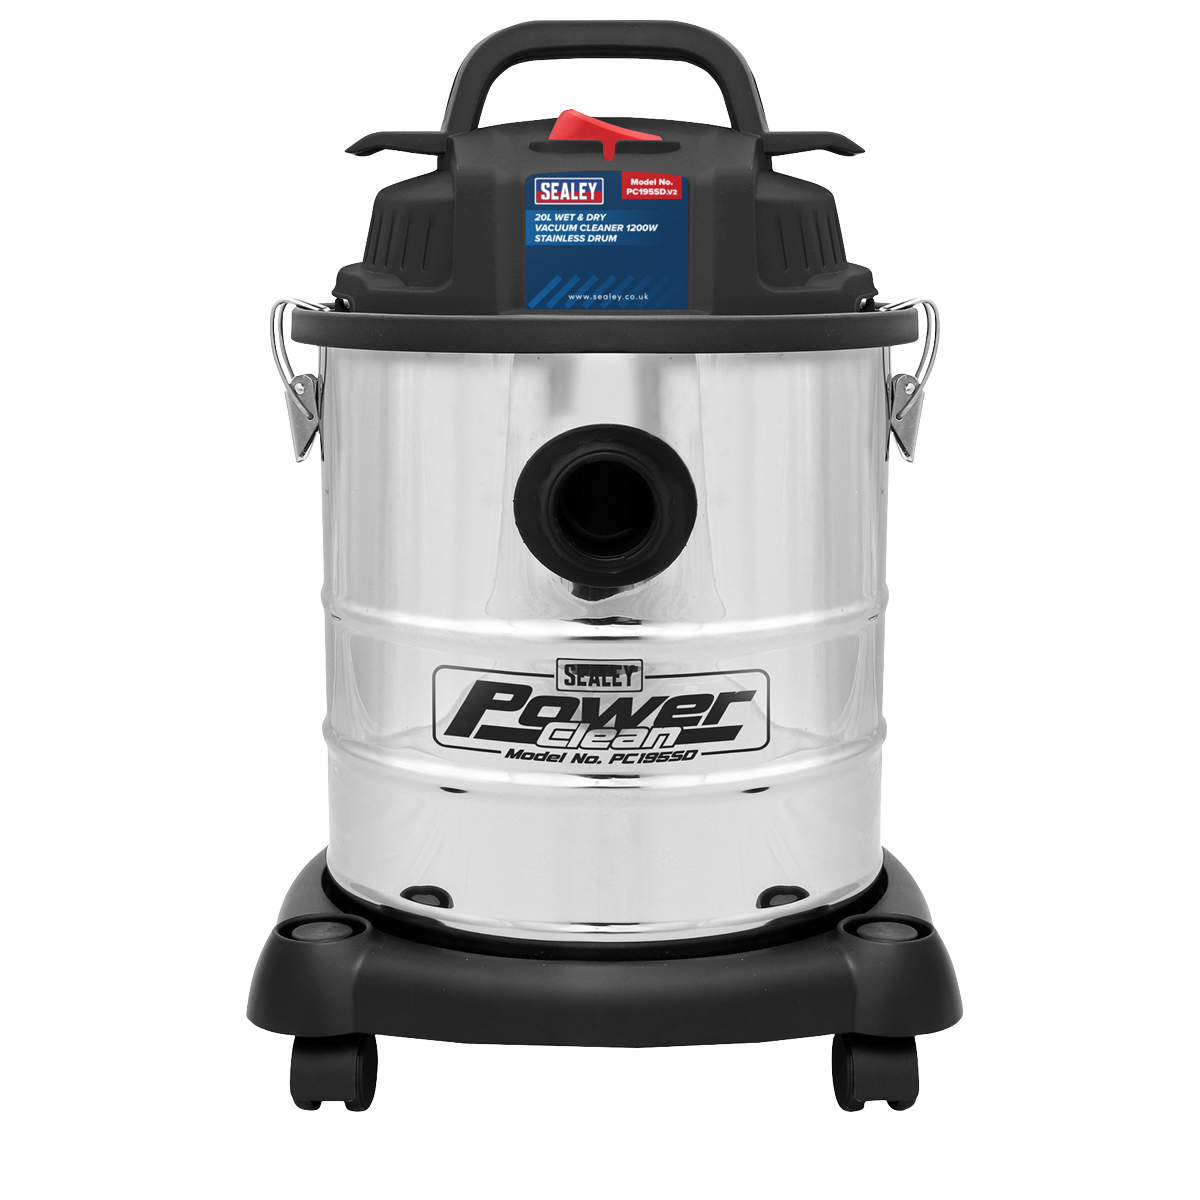 Vacuum Cleaner Wet & Dry 20L 1200W/230V Stainless Drum - PC195SD - Farming Parts